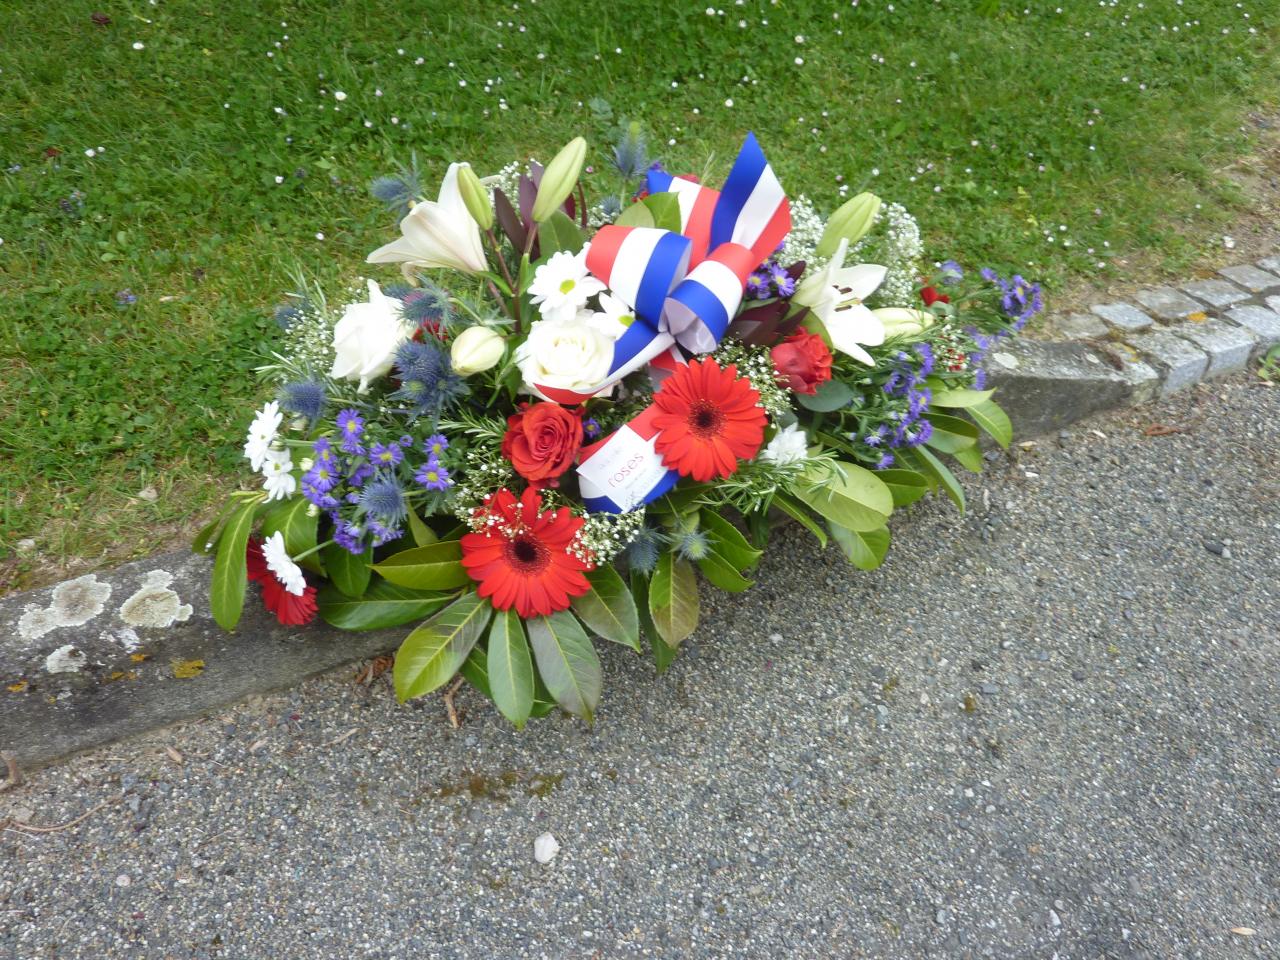 The wreath for the war memorial